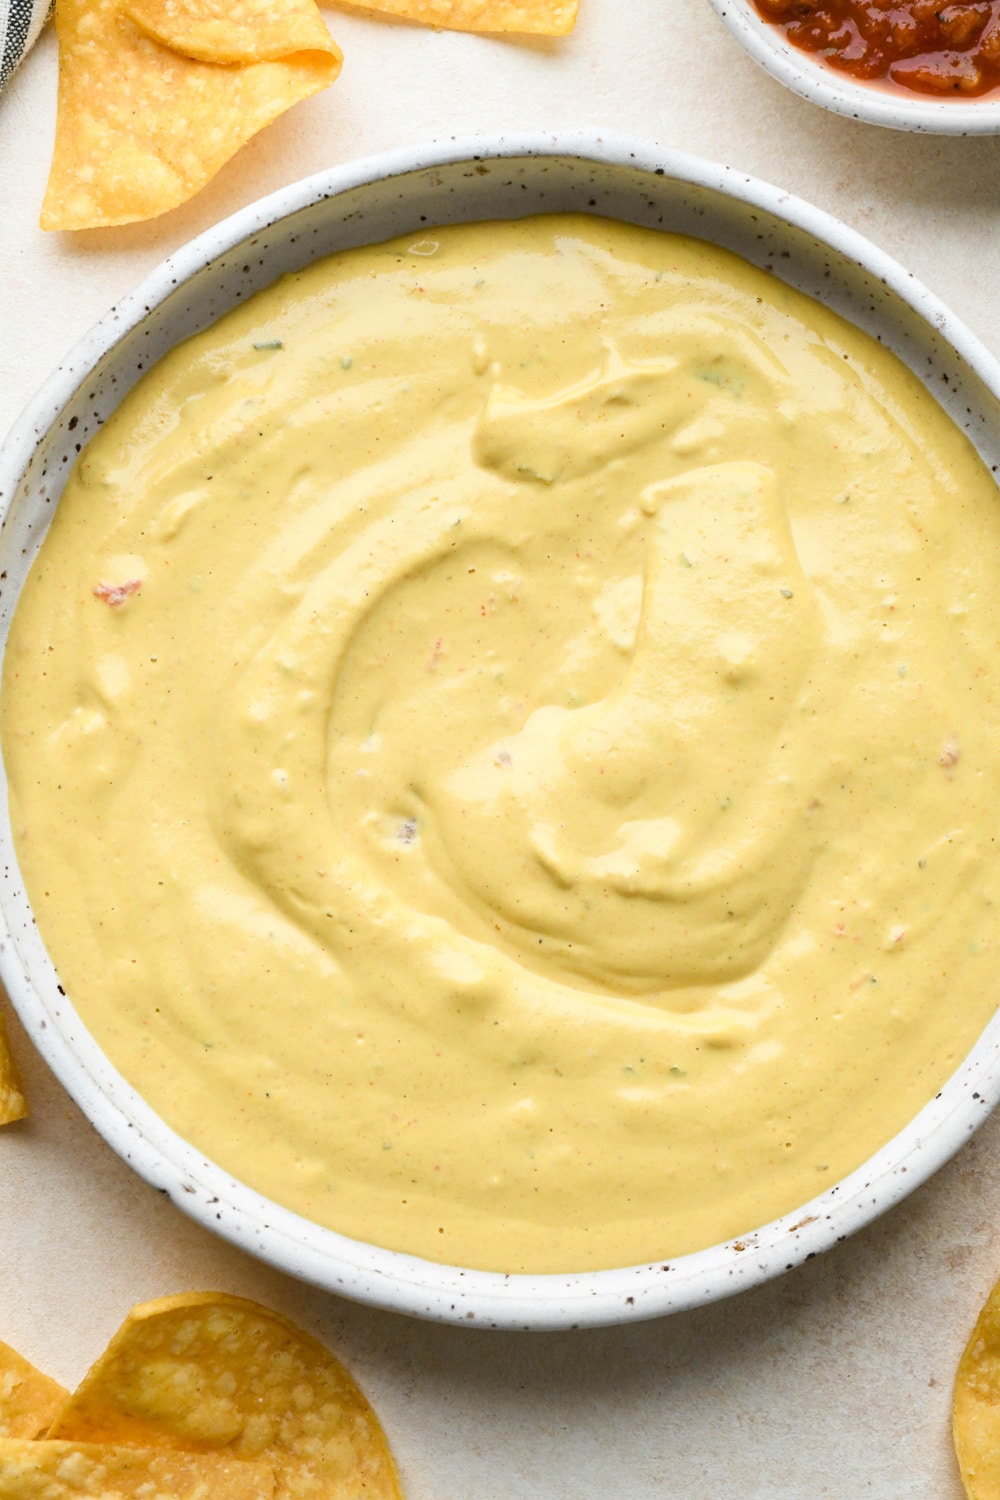 How to make cashew queso: Cashew queso in a shallow ceramic bowl with salsa, after stirring to combine.